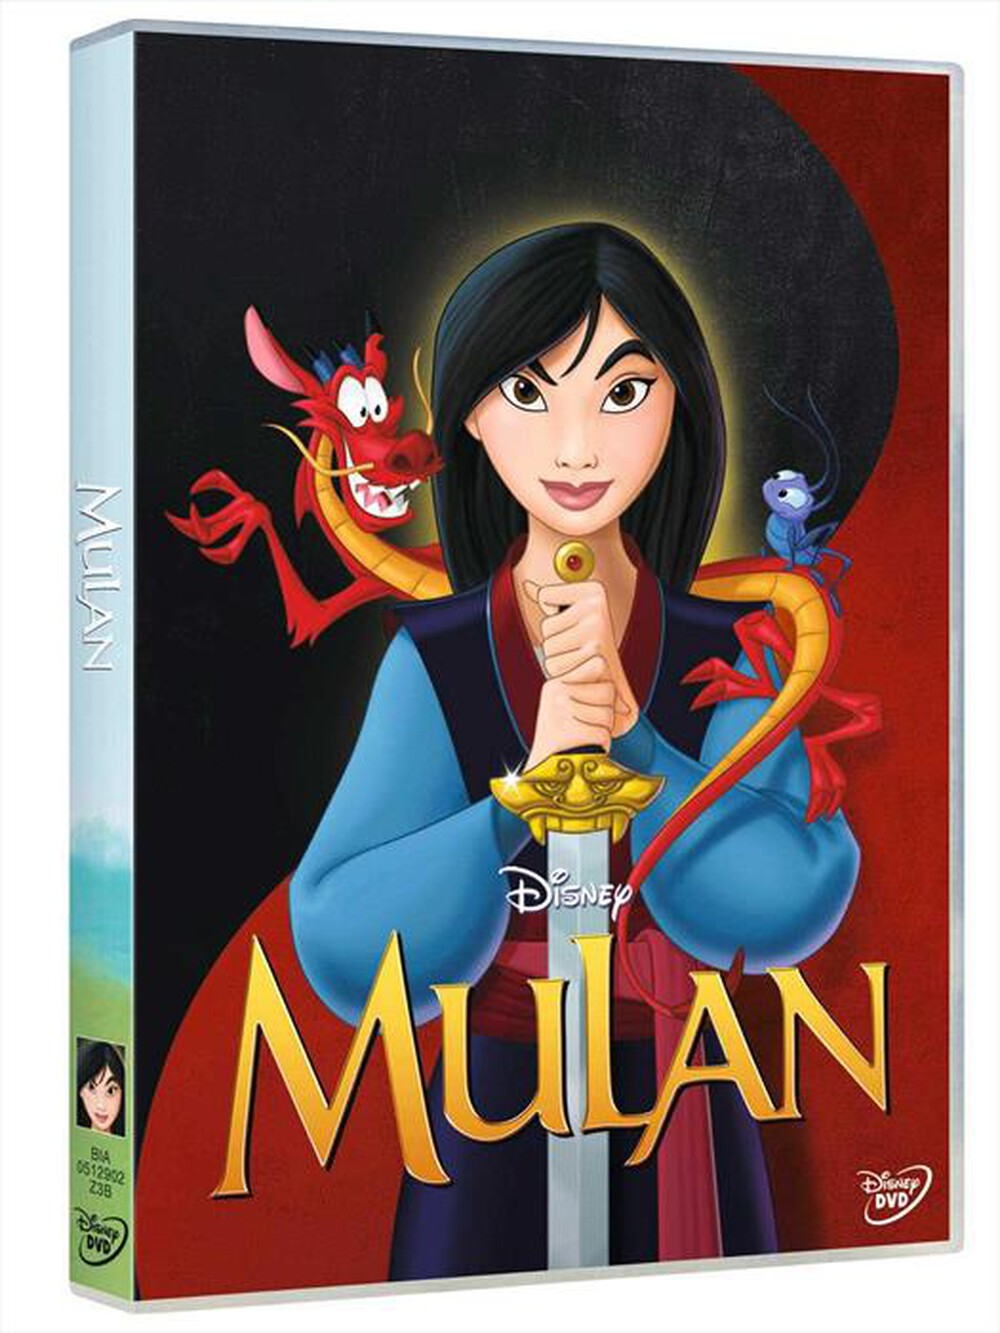 "EAGLE PICTURES - Mulan"